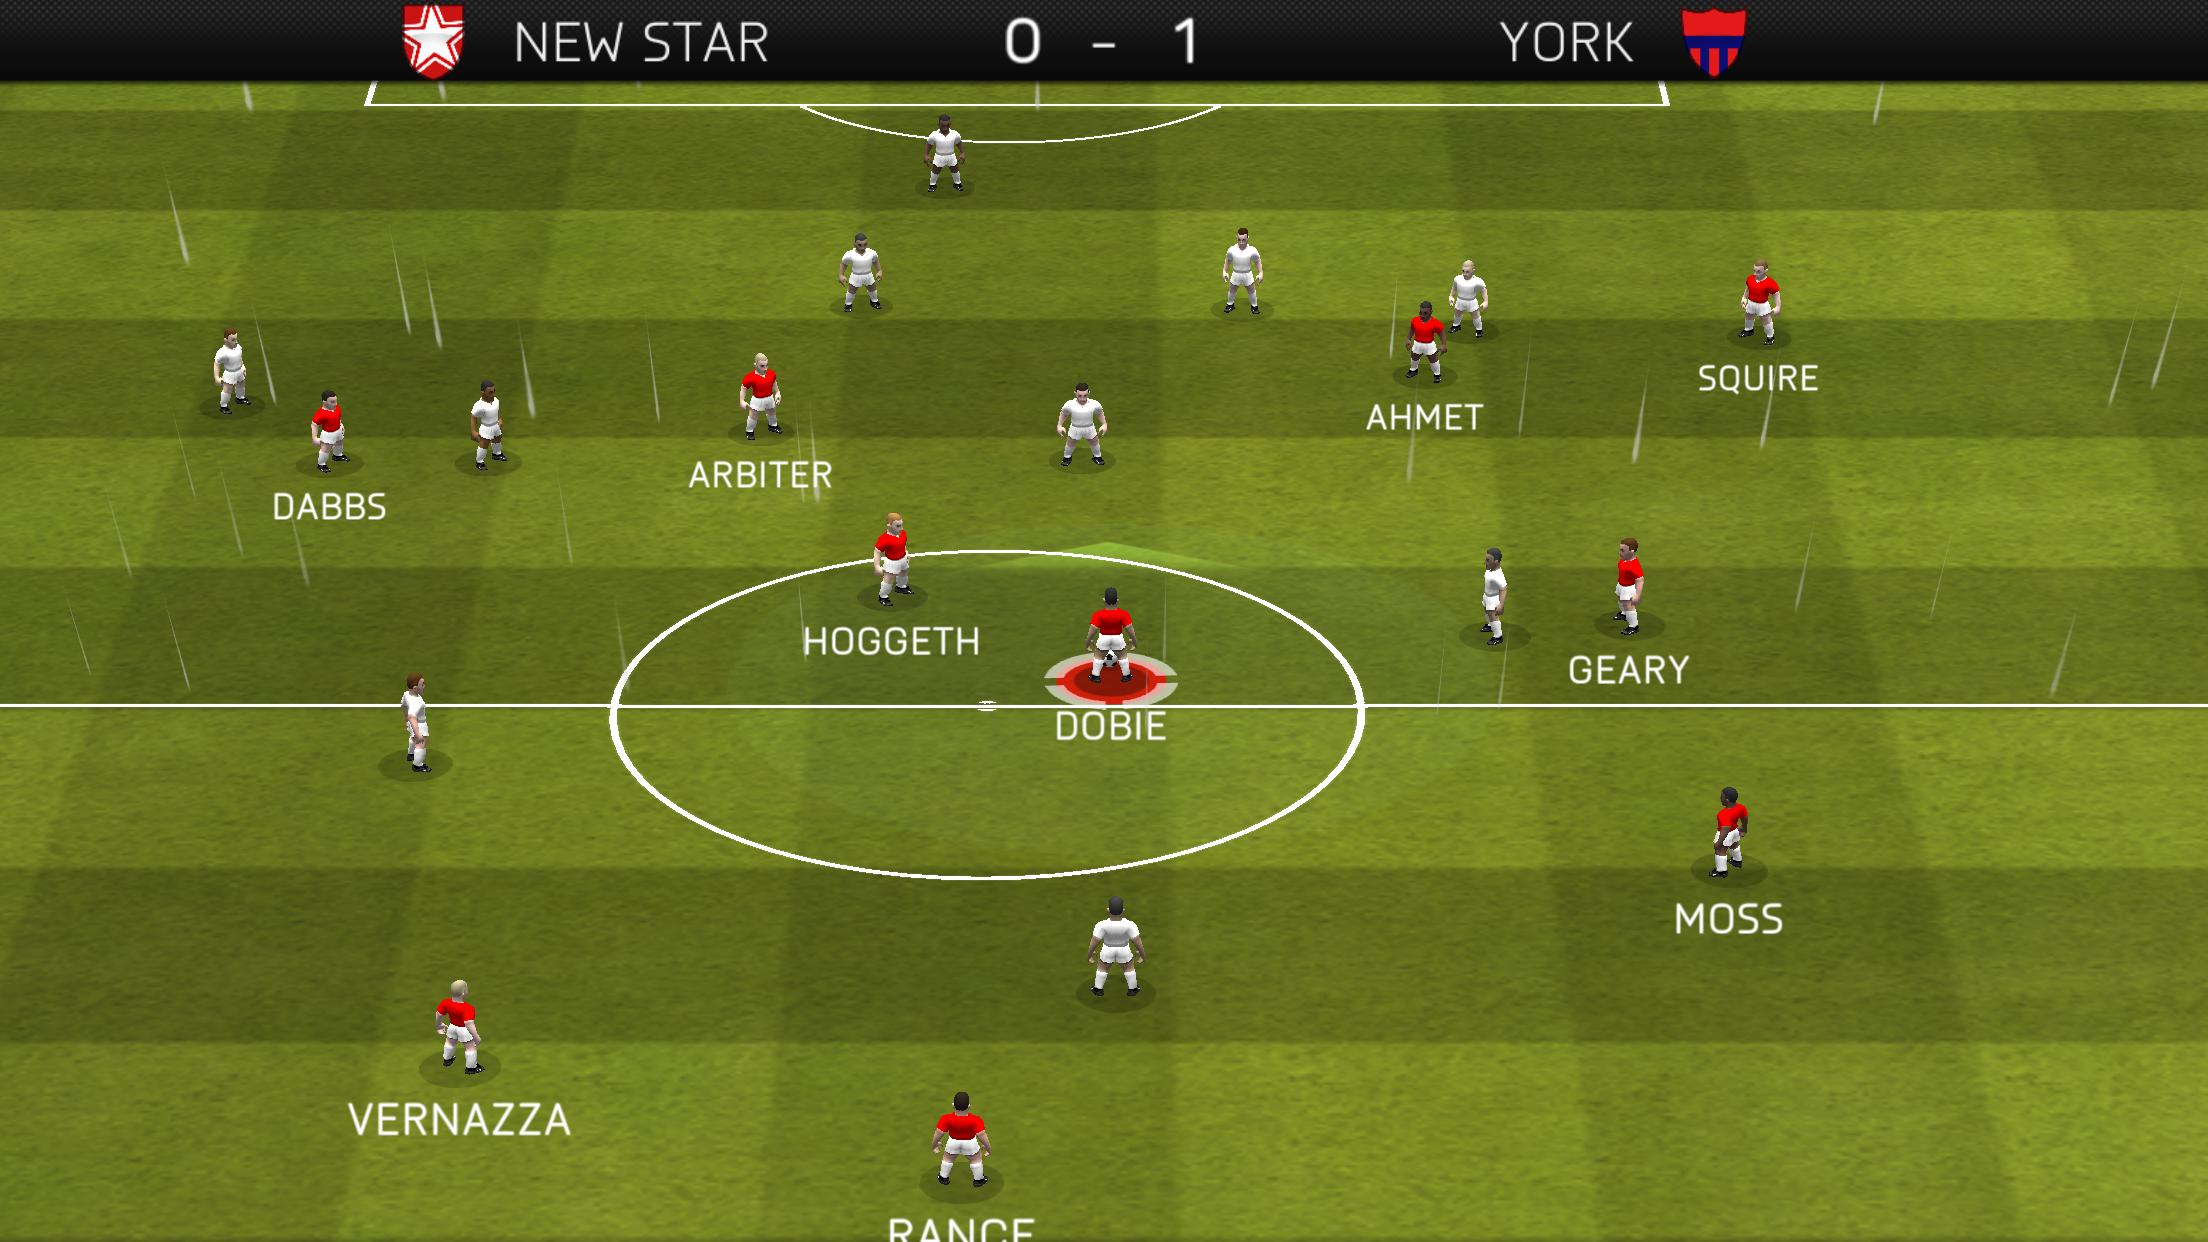 New star videos. New Star Manager. New Star Manager много денег. New Star Manager PC. Soccer Star Manager Mod.